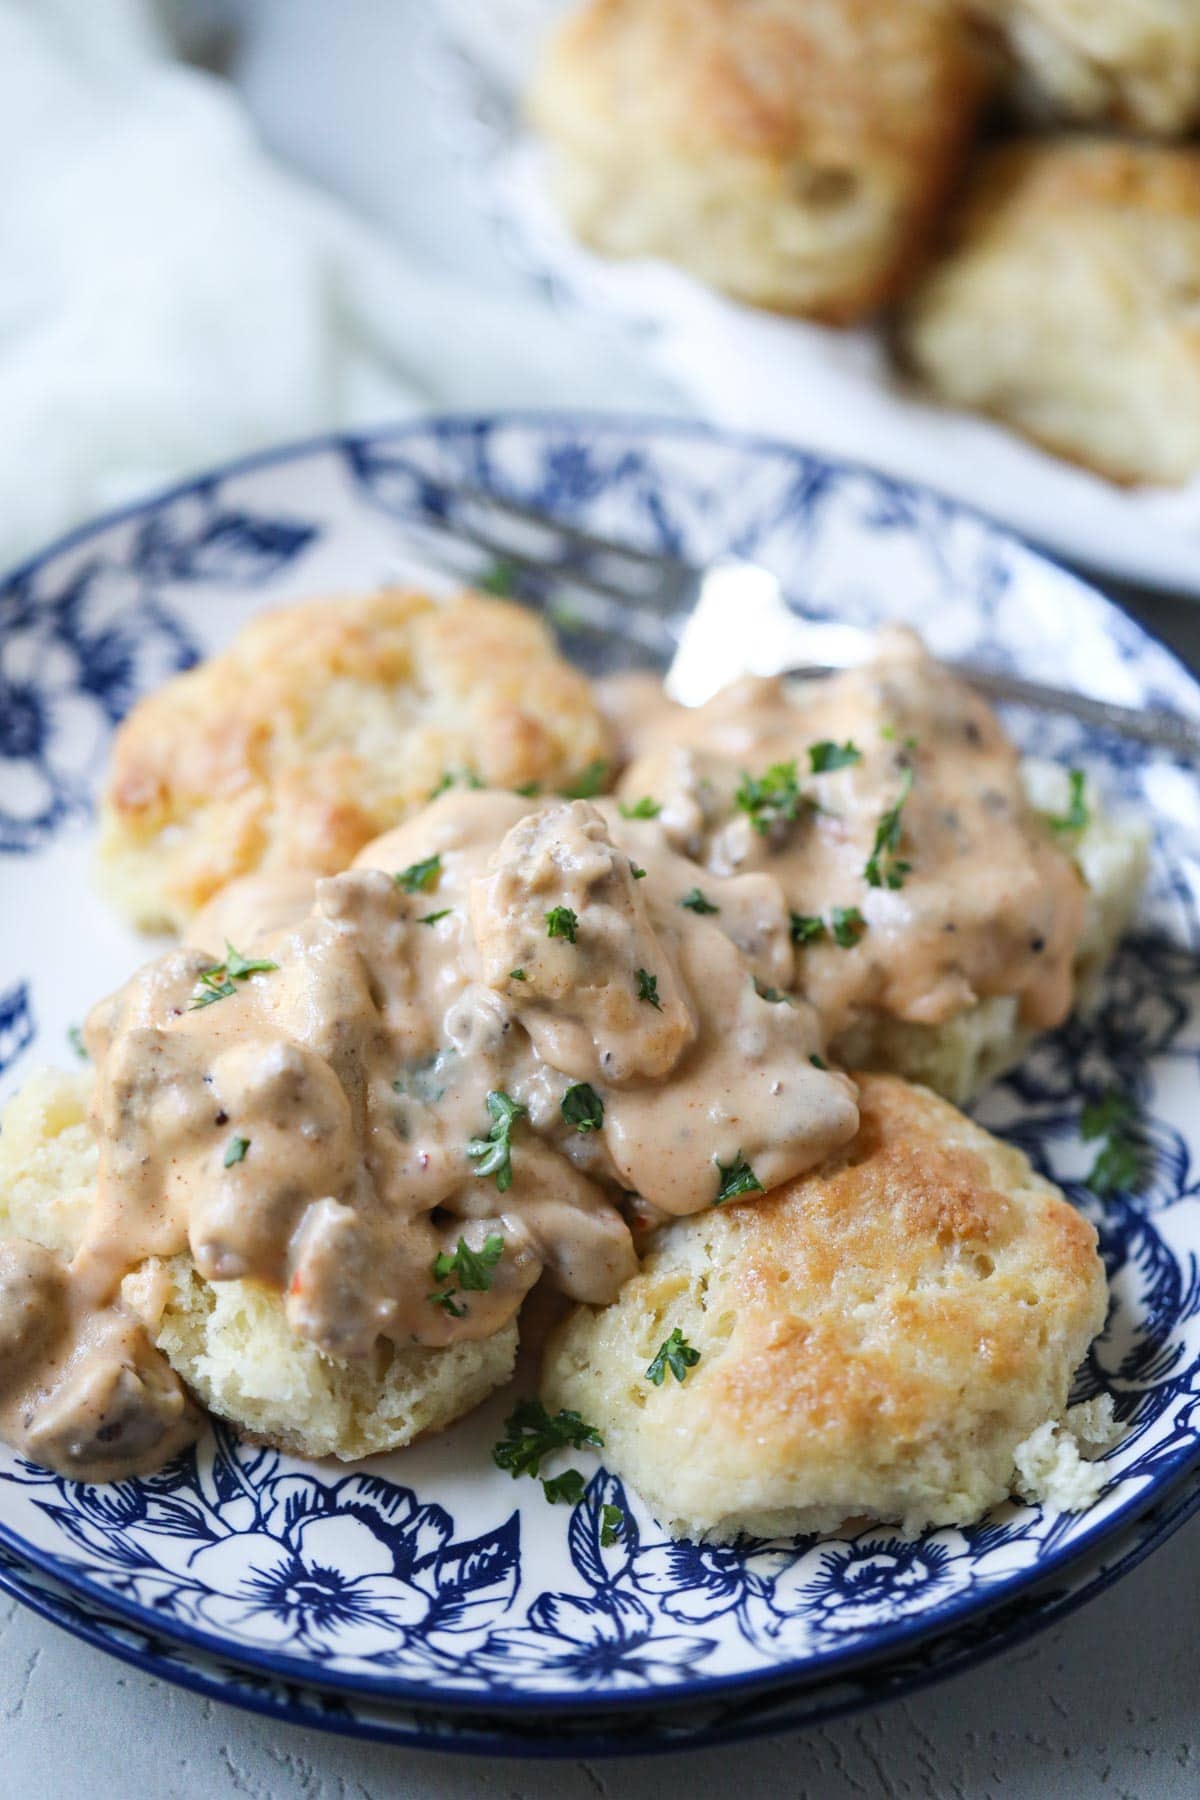 biscuits and gravy on blue and white plate.